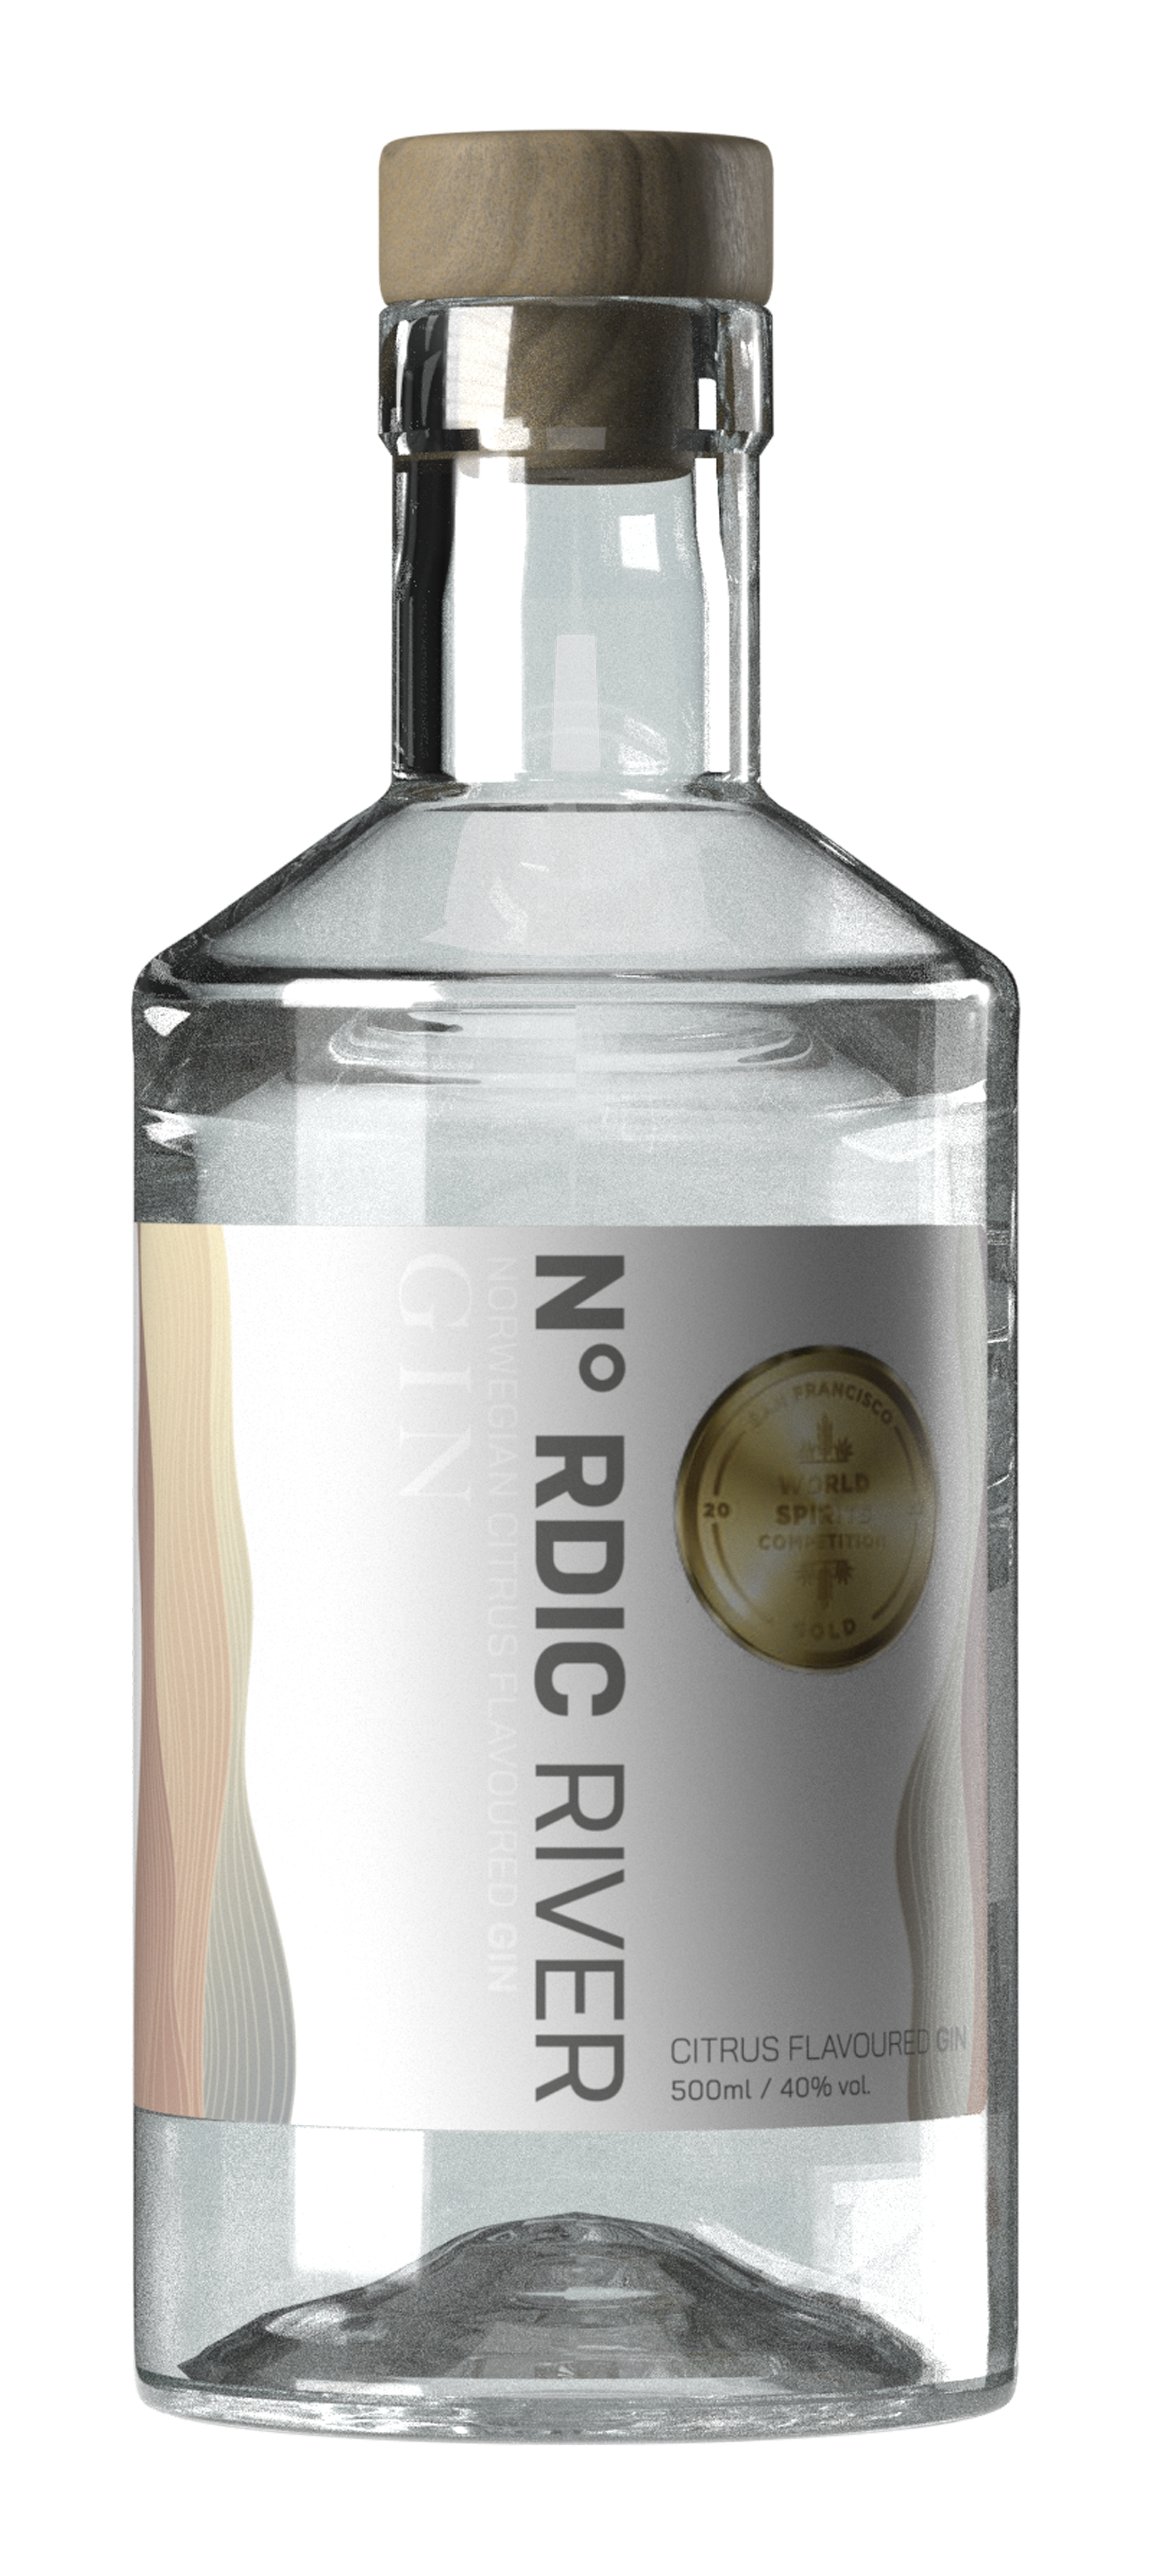 Nordic River Citrus flavored GIN 0,5L null - onesize - 1